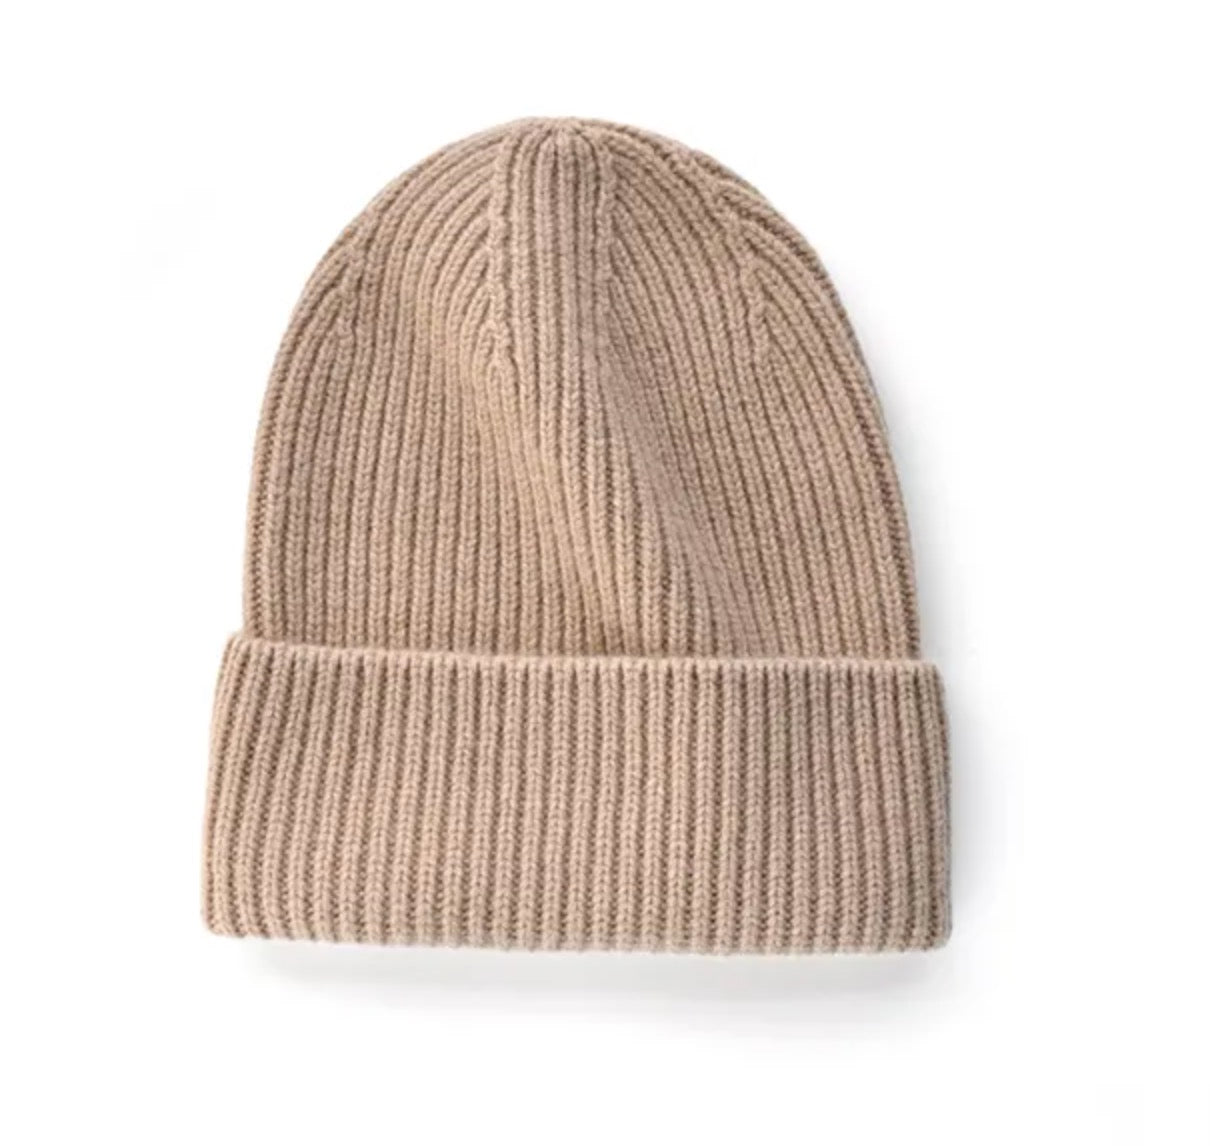 Merino wool beanie hat with fold over hem | 10 colors